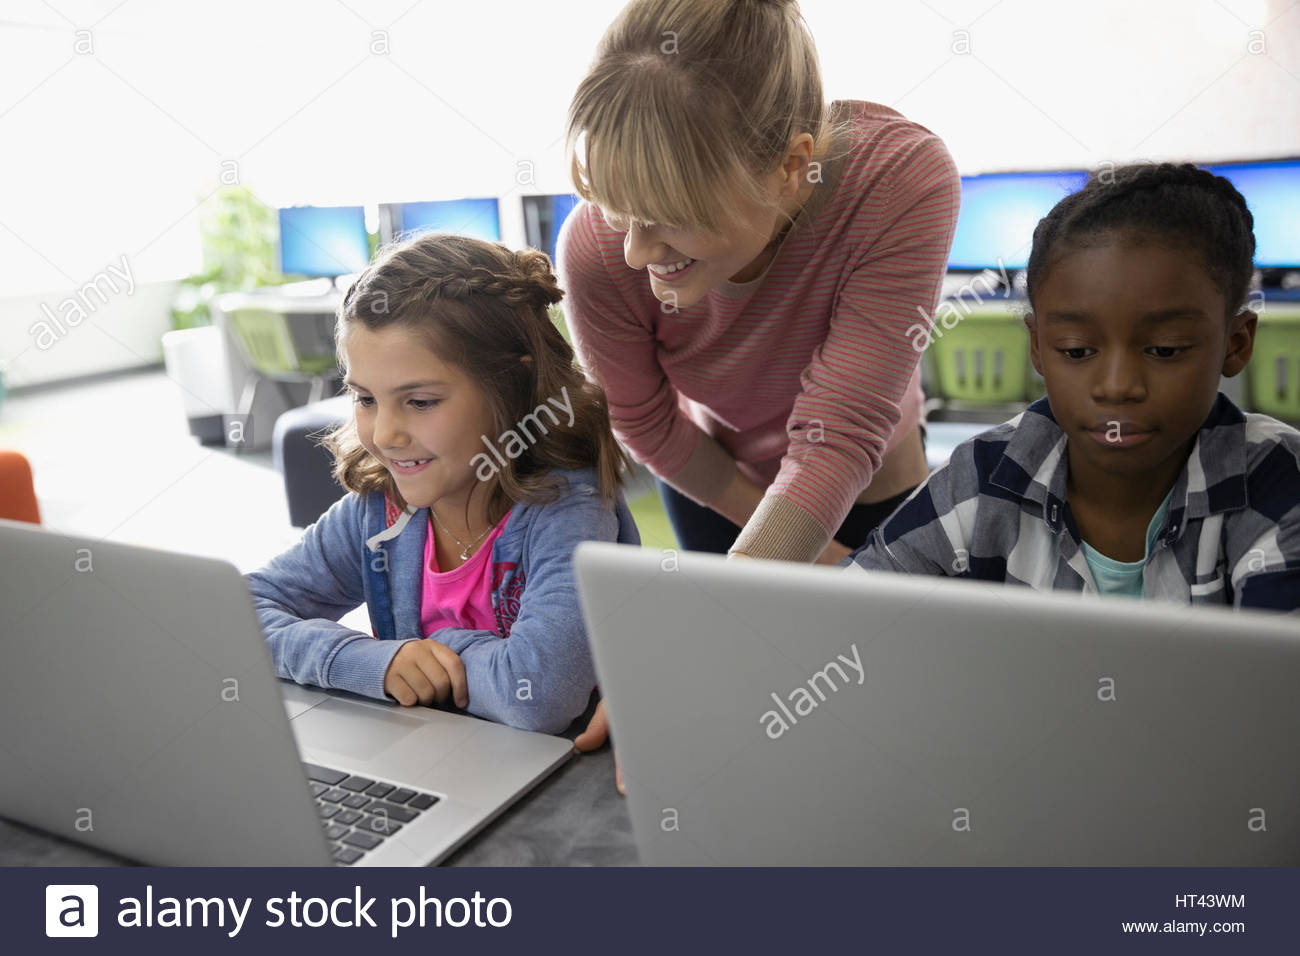 8 year-old girl - Stock Image - C035/1832 - Science Photo Library